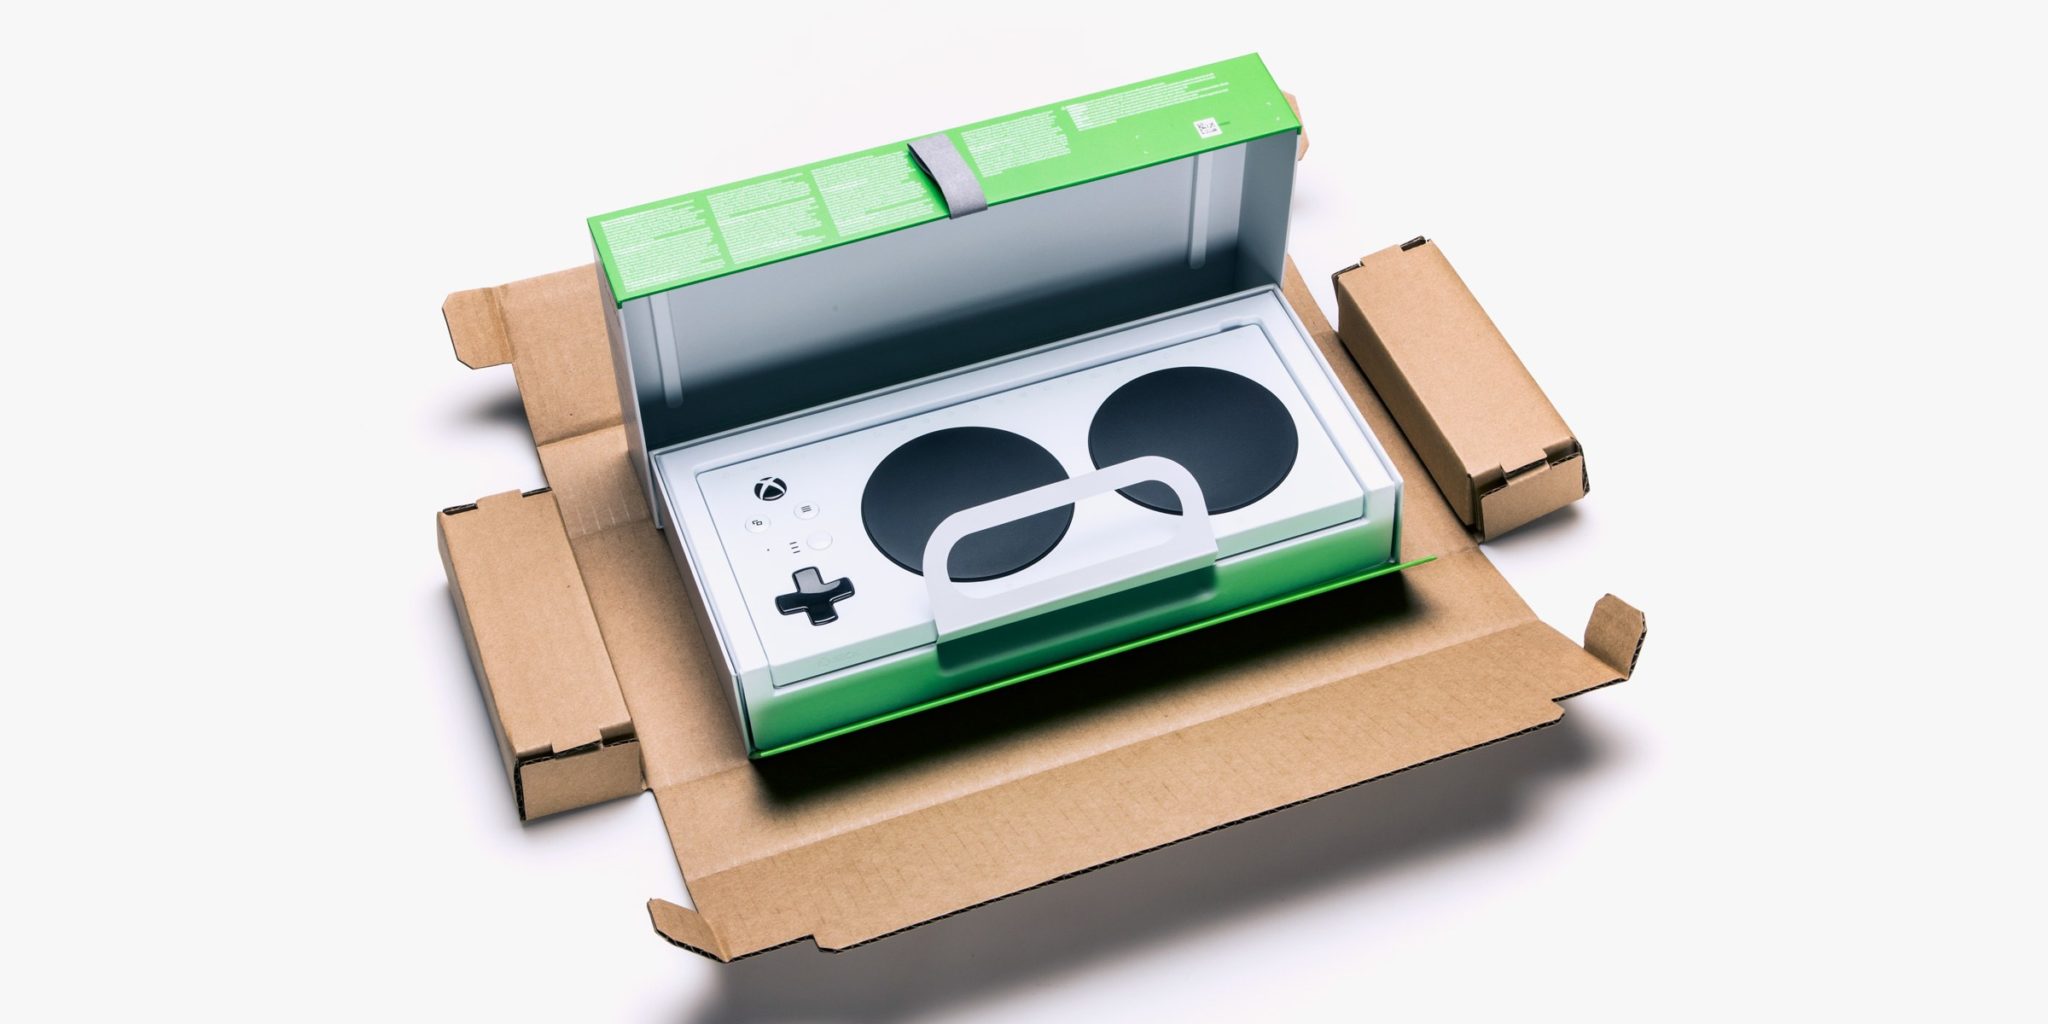 Xbox Adaptive Controller Packaging